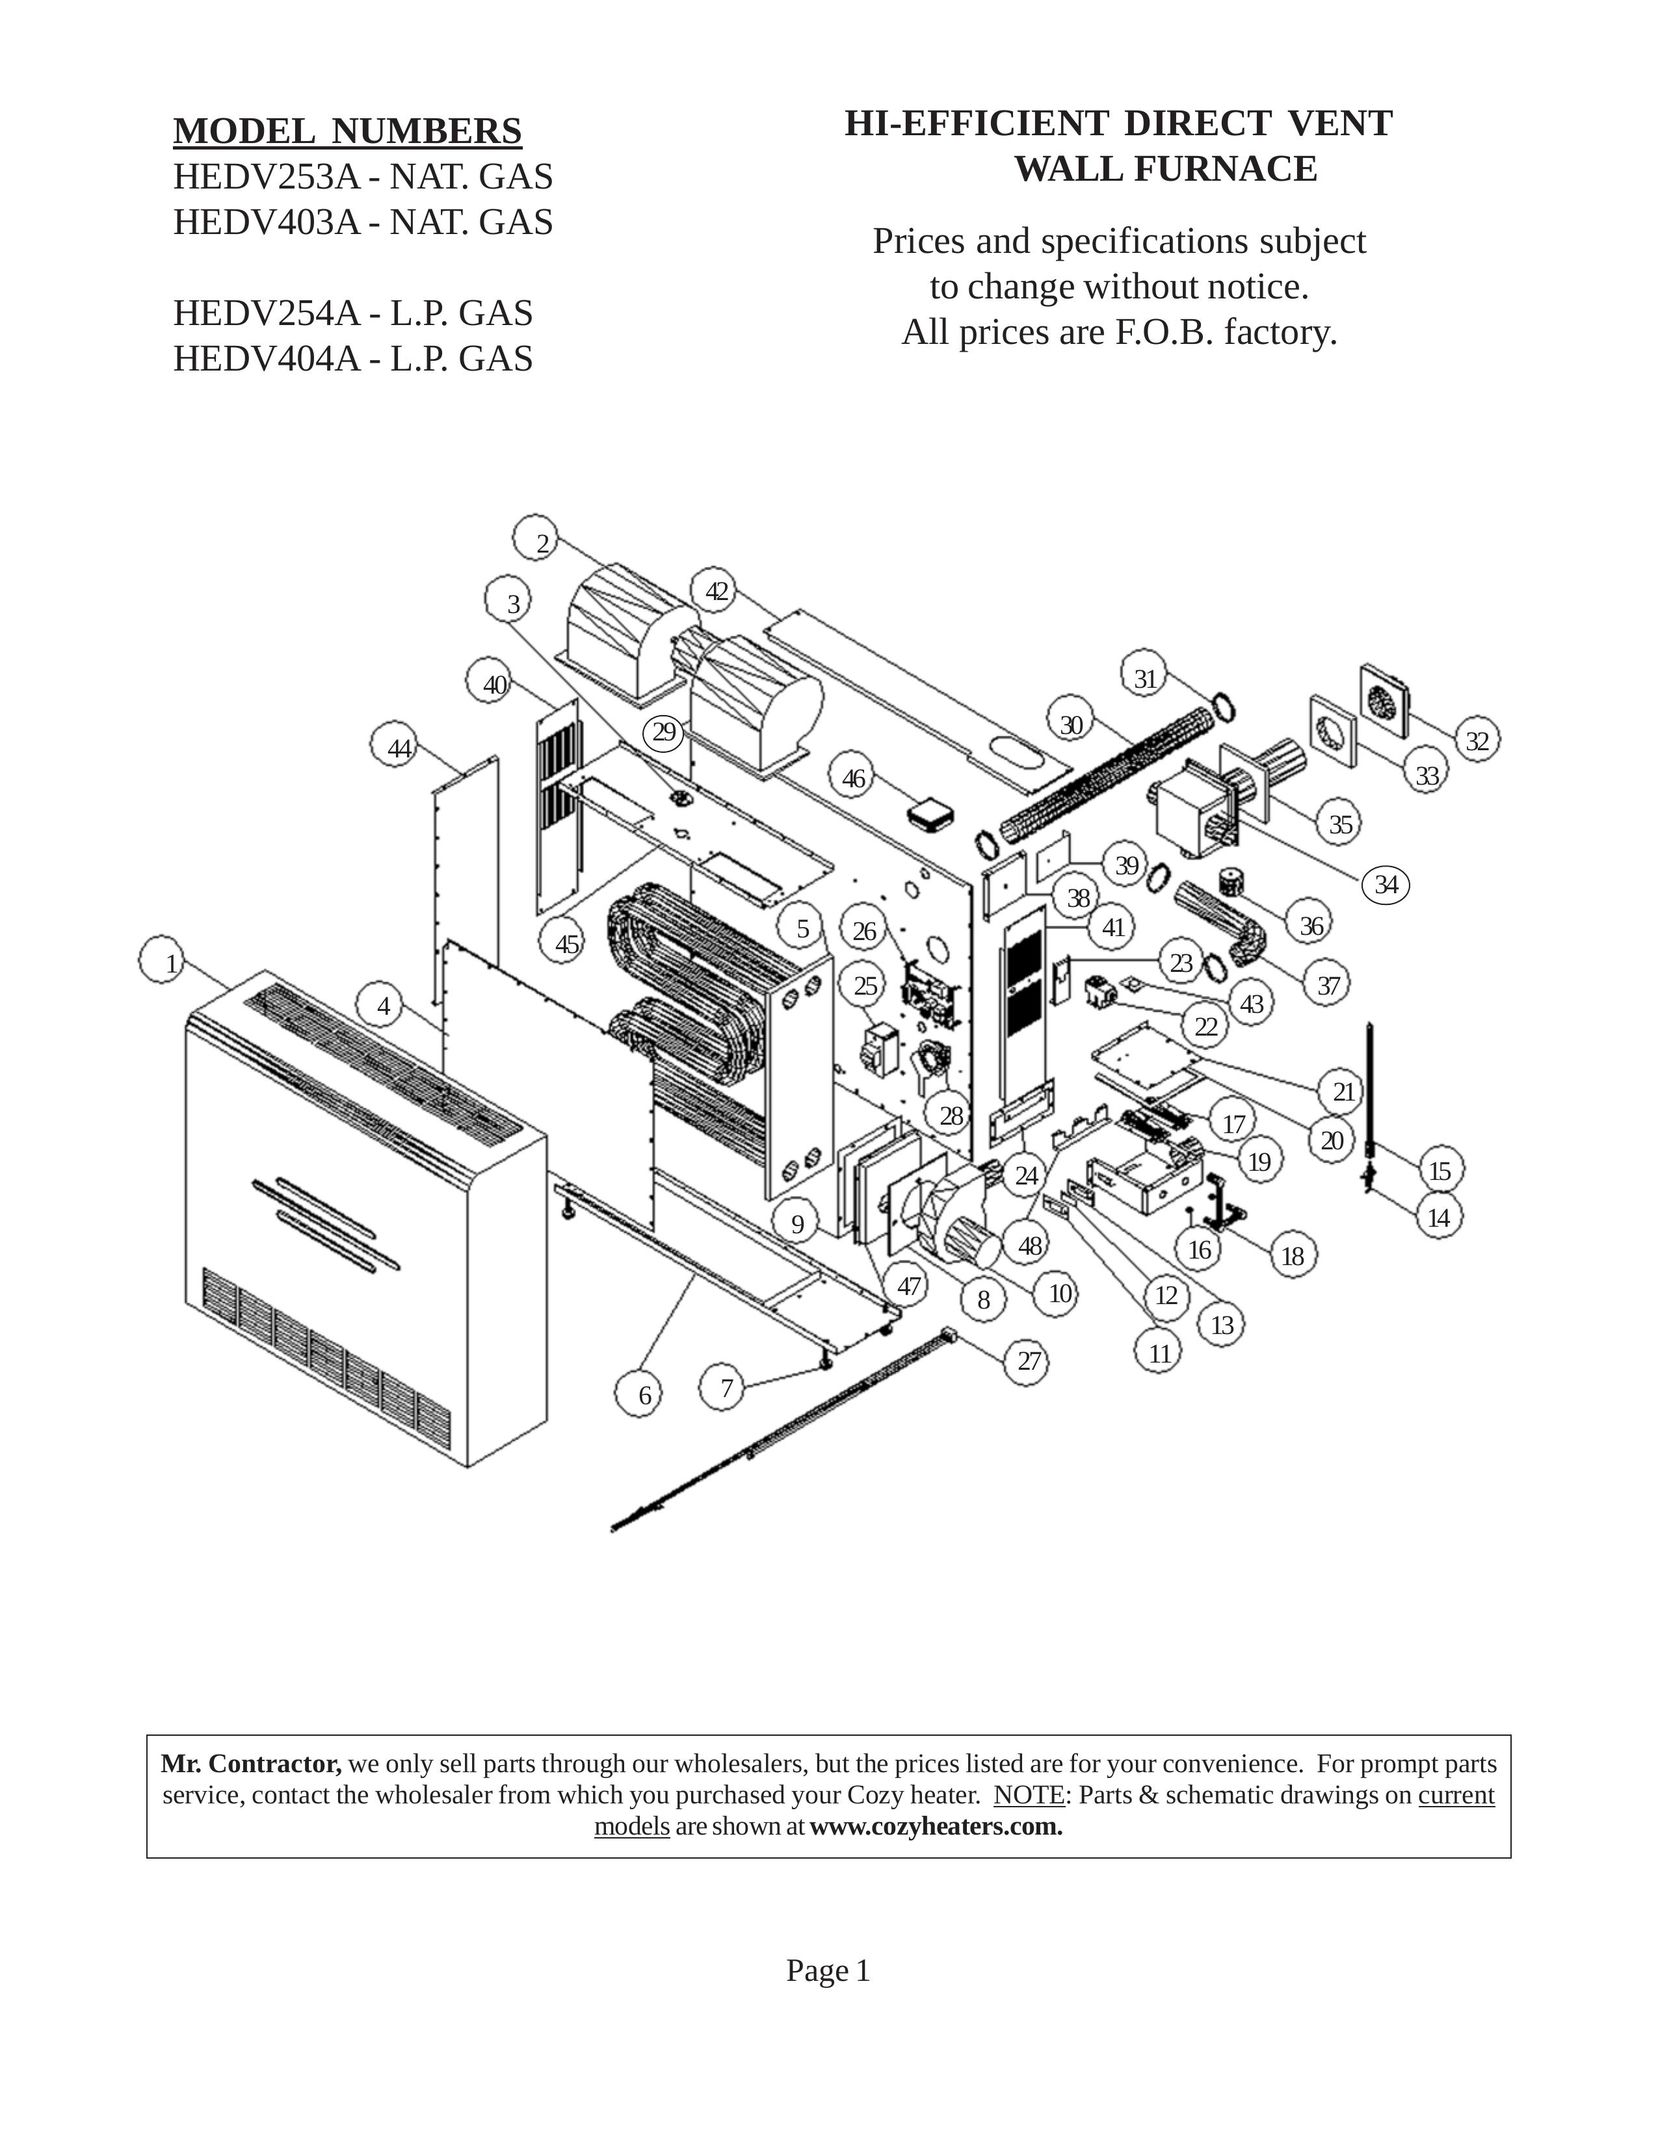 Louisville Tin and Stove HEDV404A Furnace User Manual